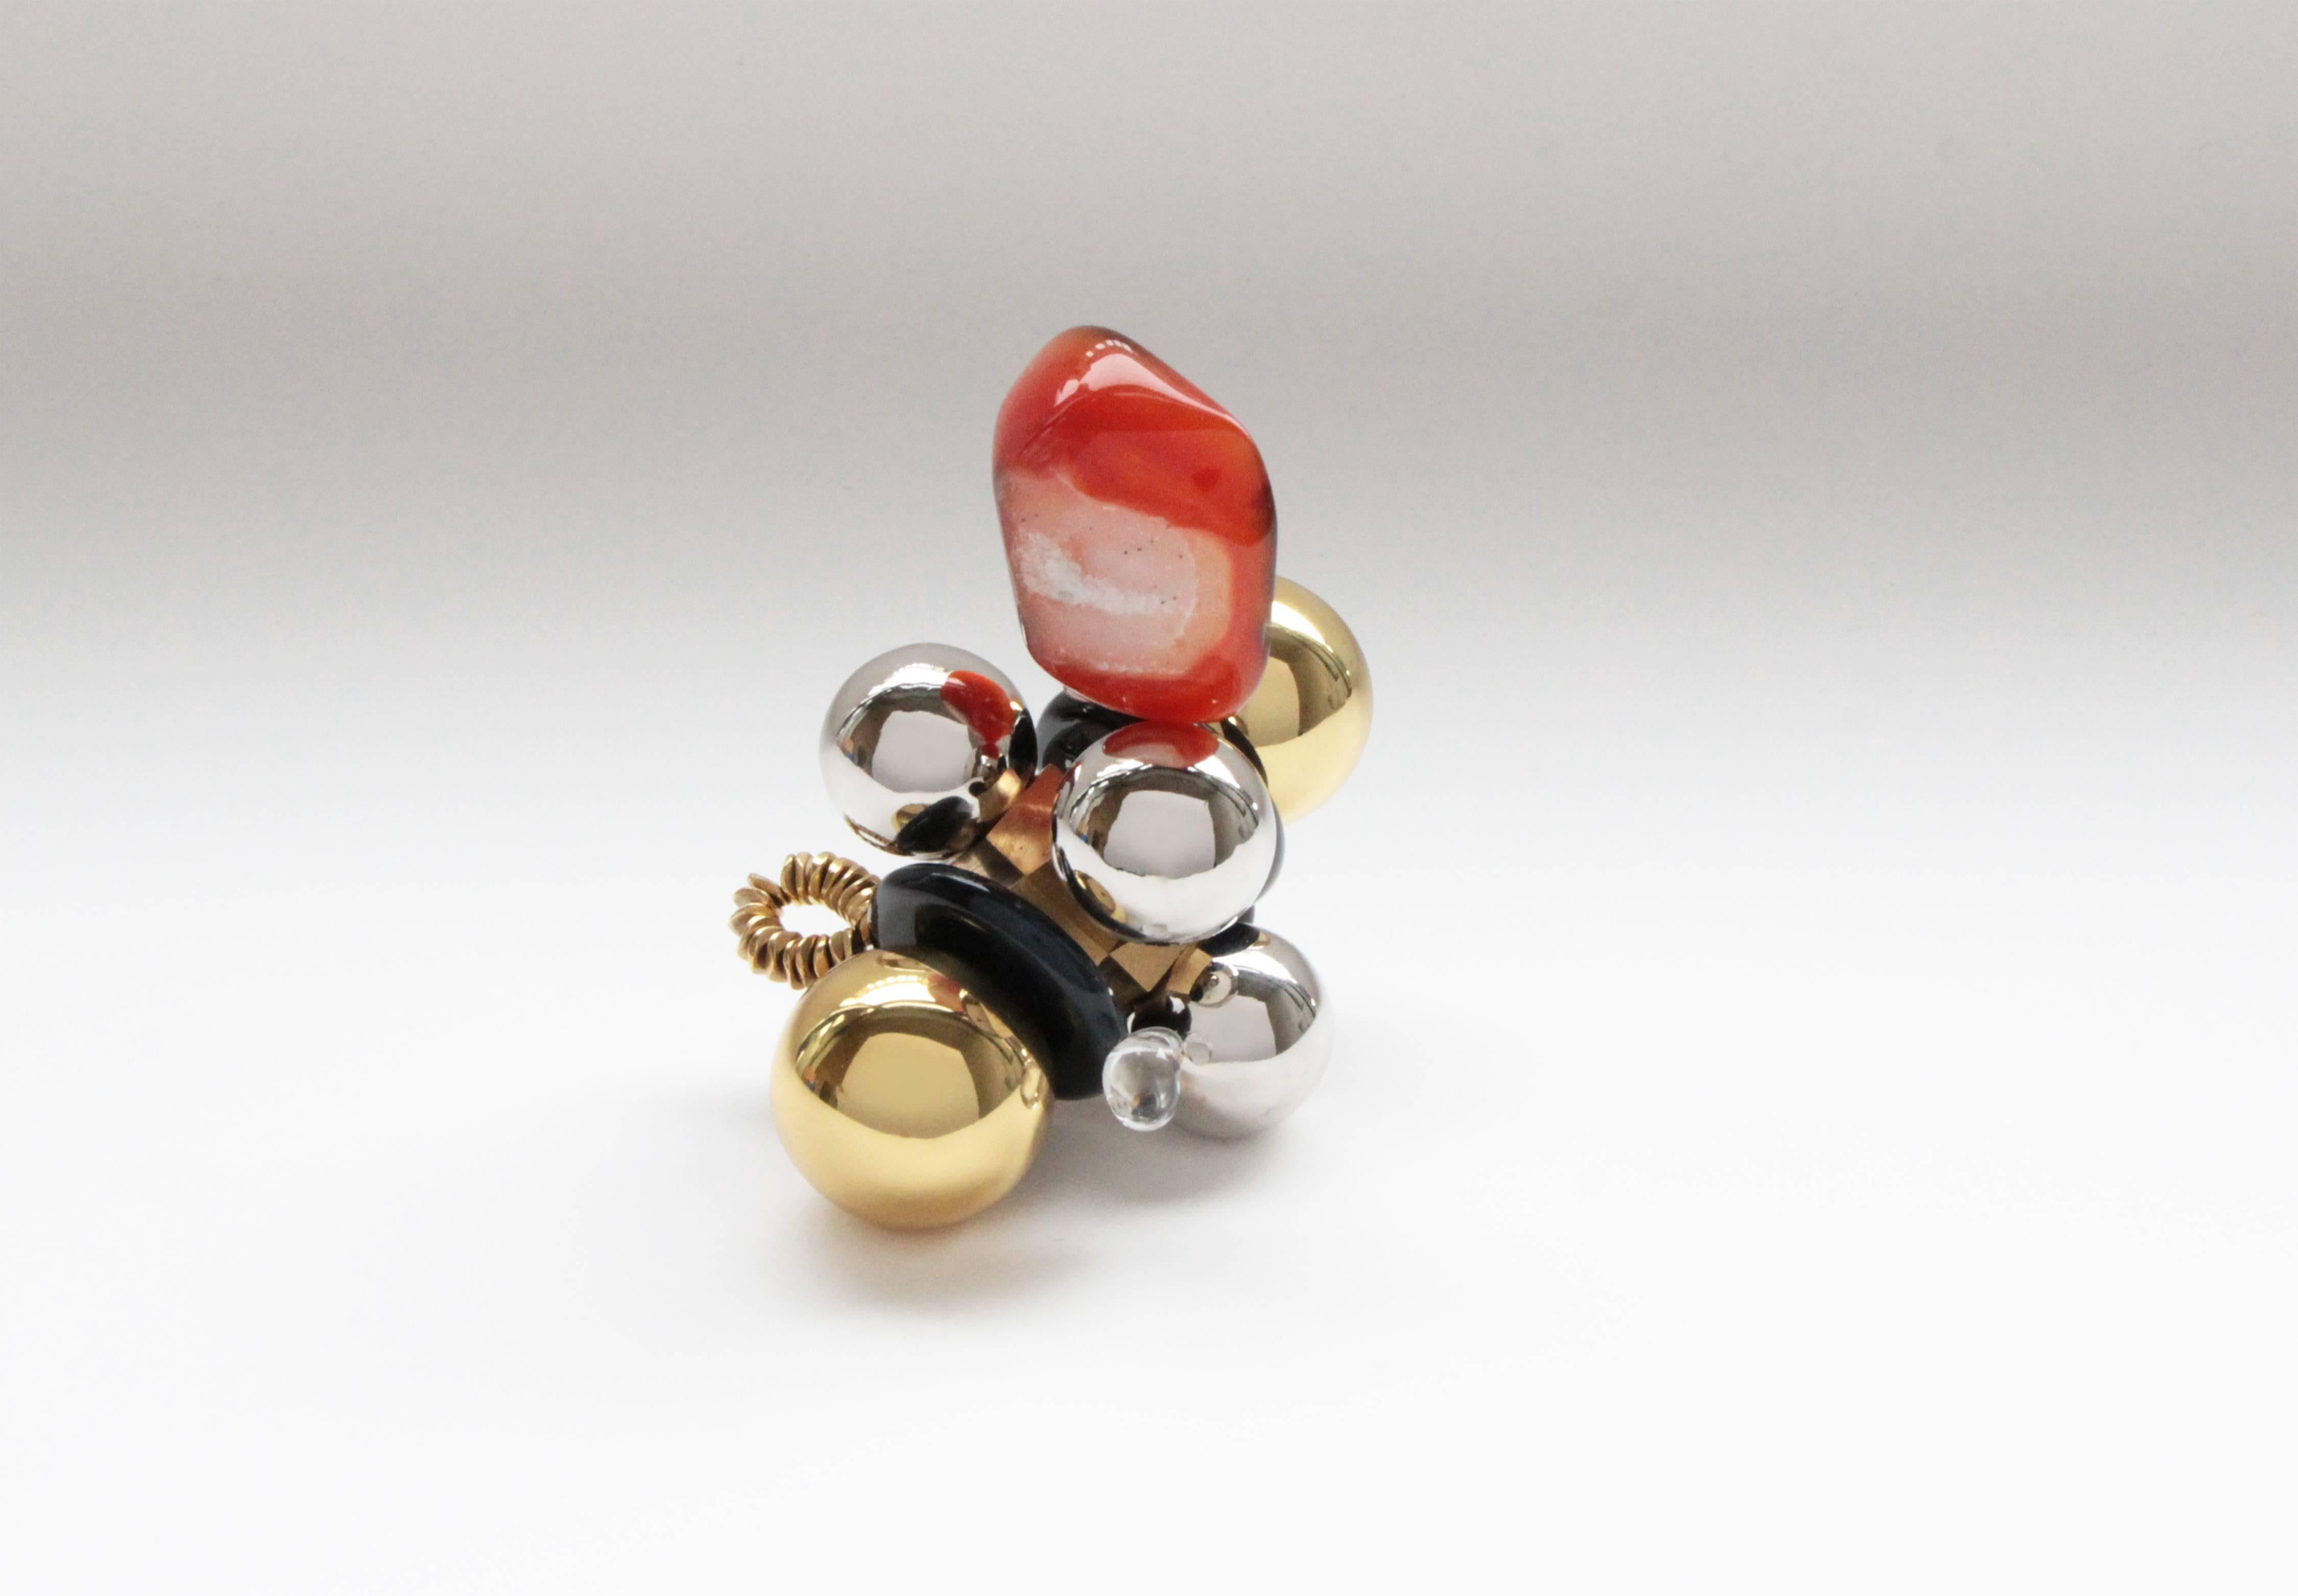 'Roso' is handcrafted from polished and sealed cast brass, nickel-plated spheres, red agate onyx stone, glass and brass beads, with clear quartz and black stone. This contemporary object makes for an ideal paperweight or small sculpture curiosity.